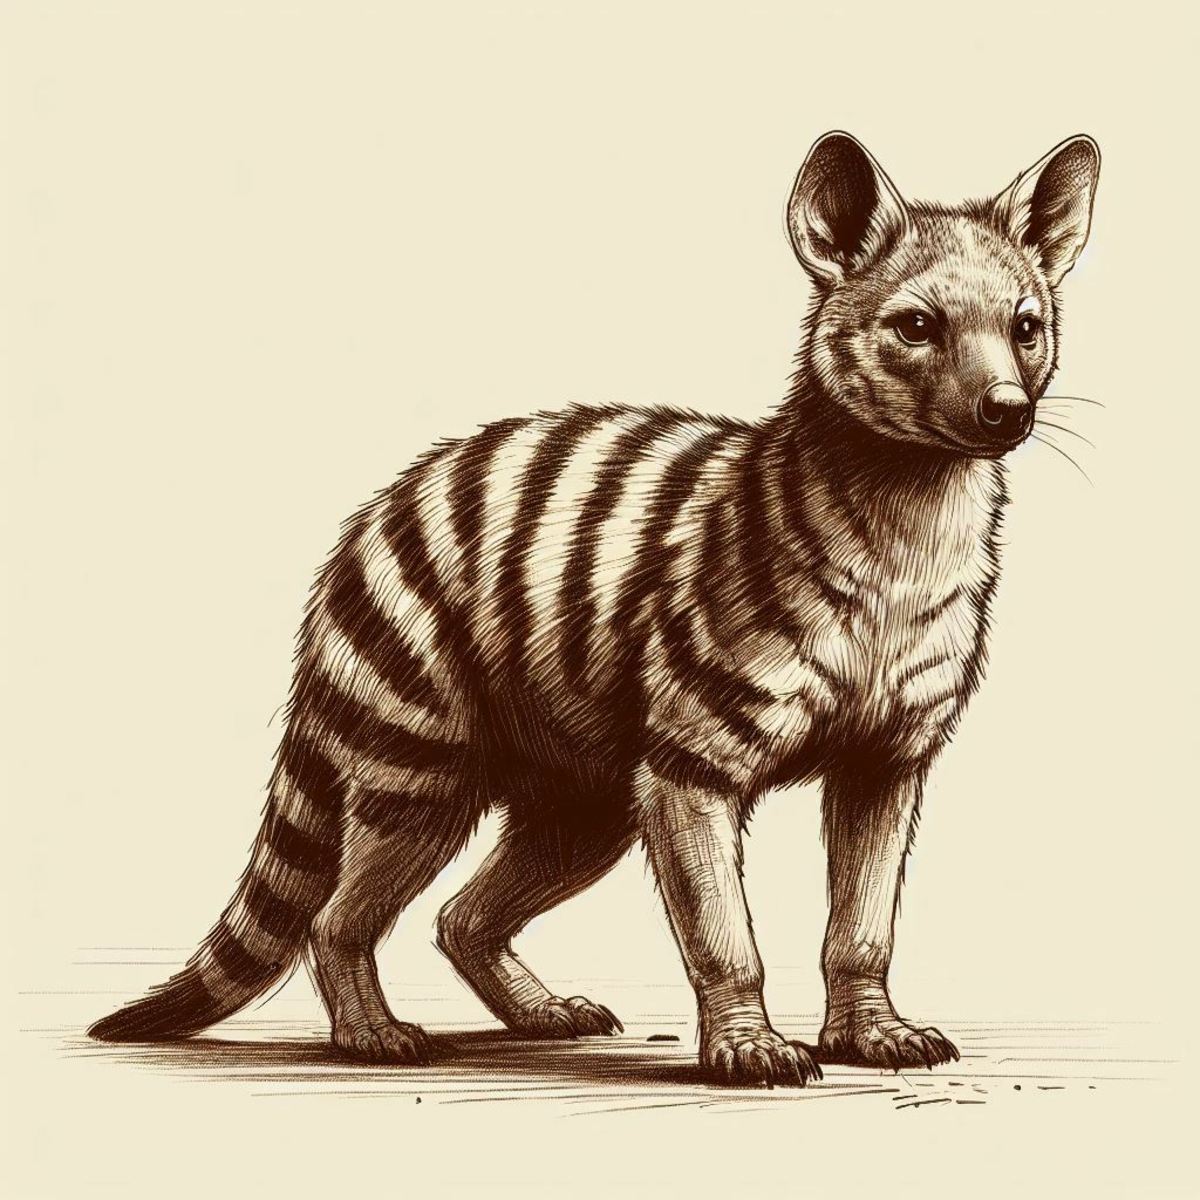 What Happened To The Tasmanian Tiger?